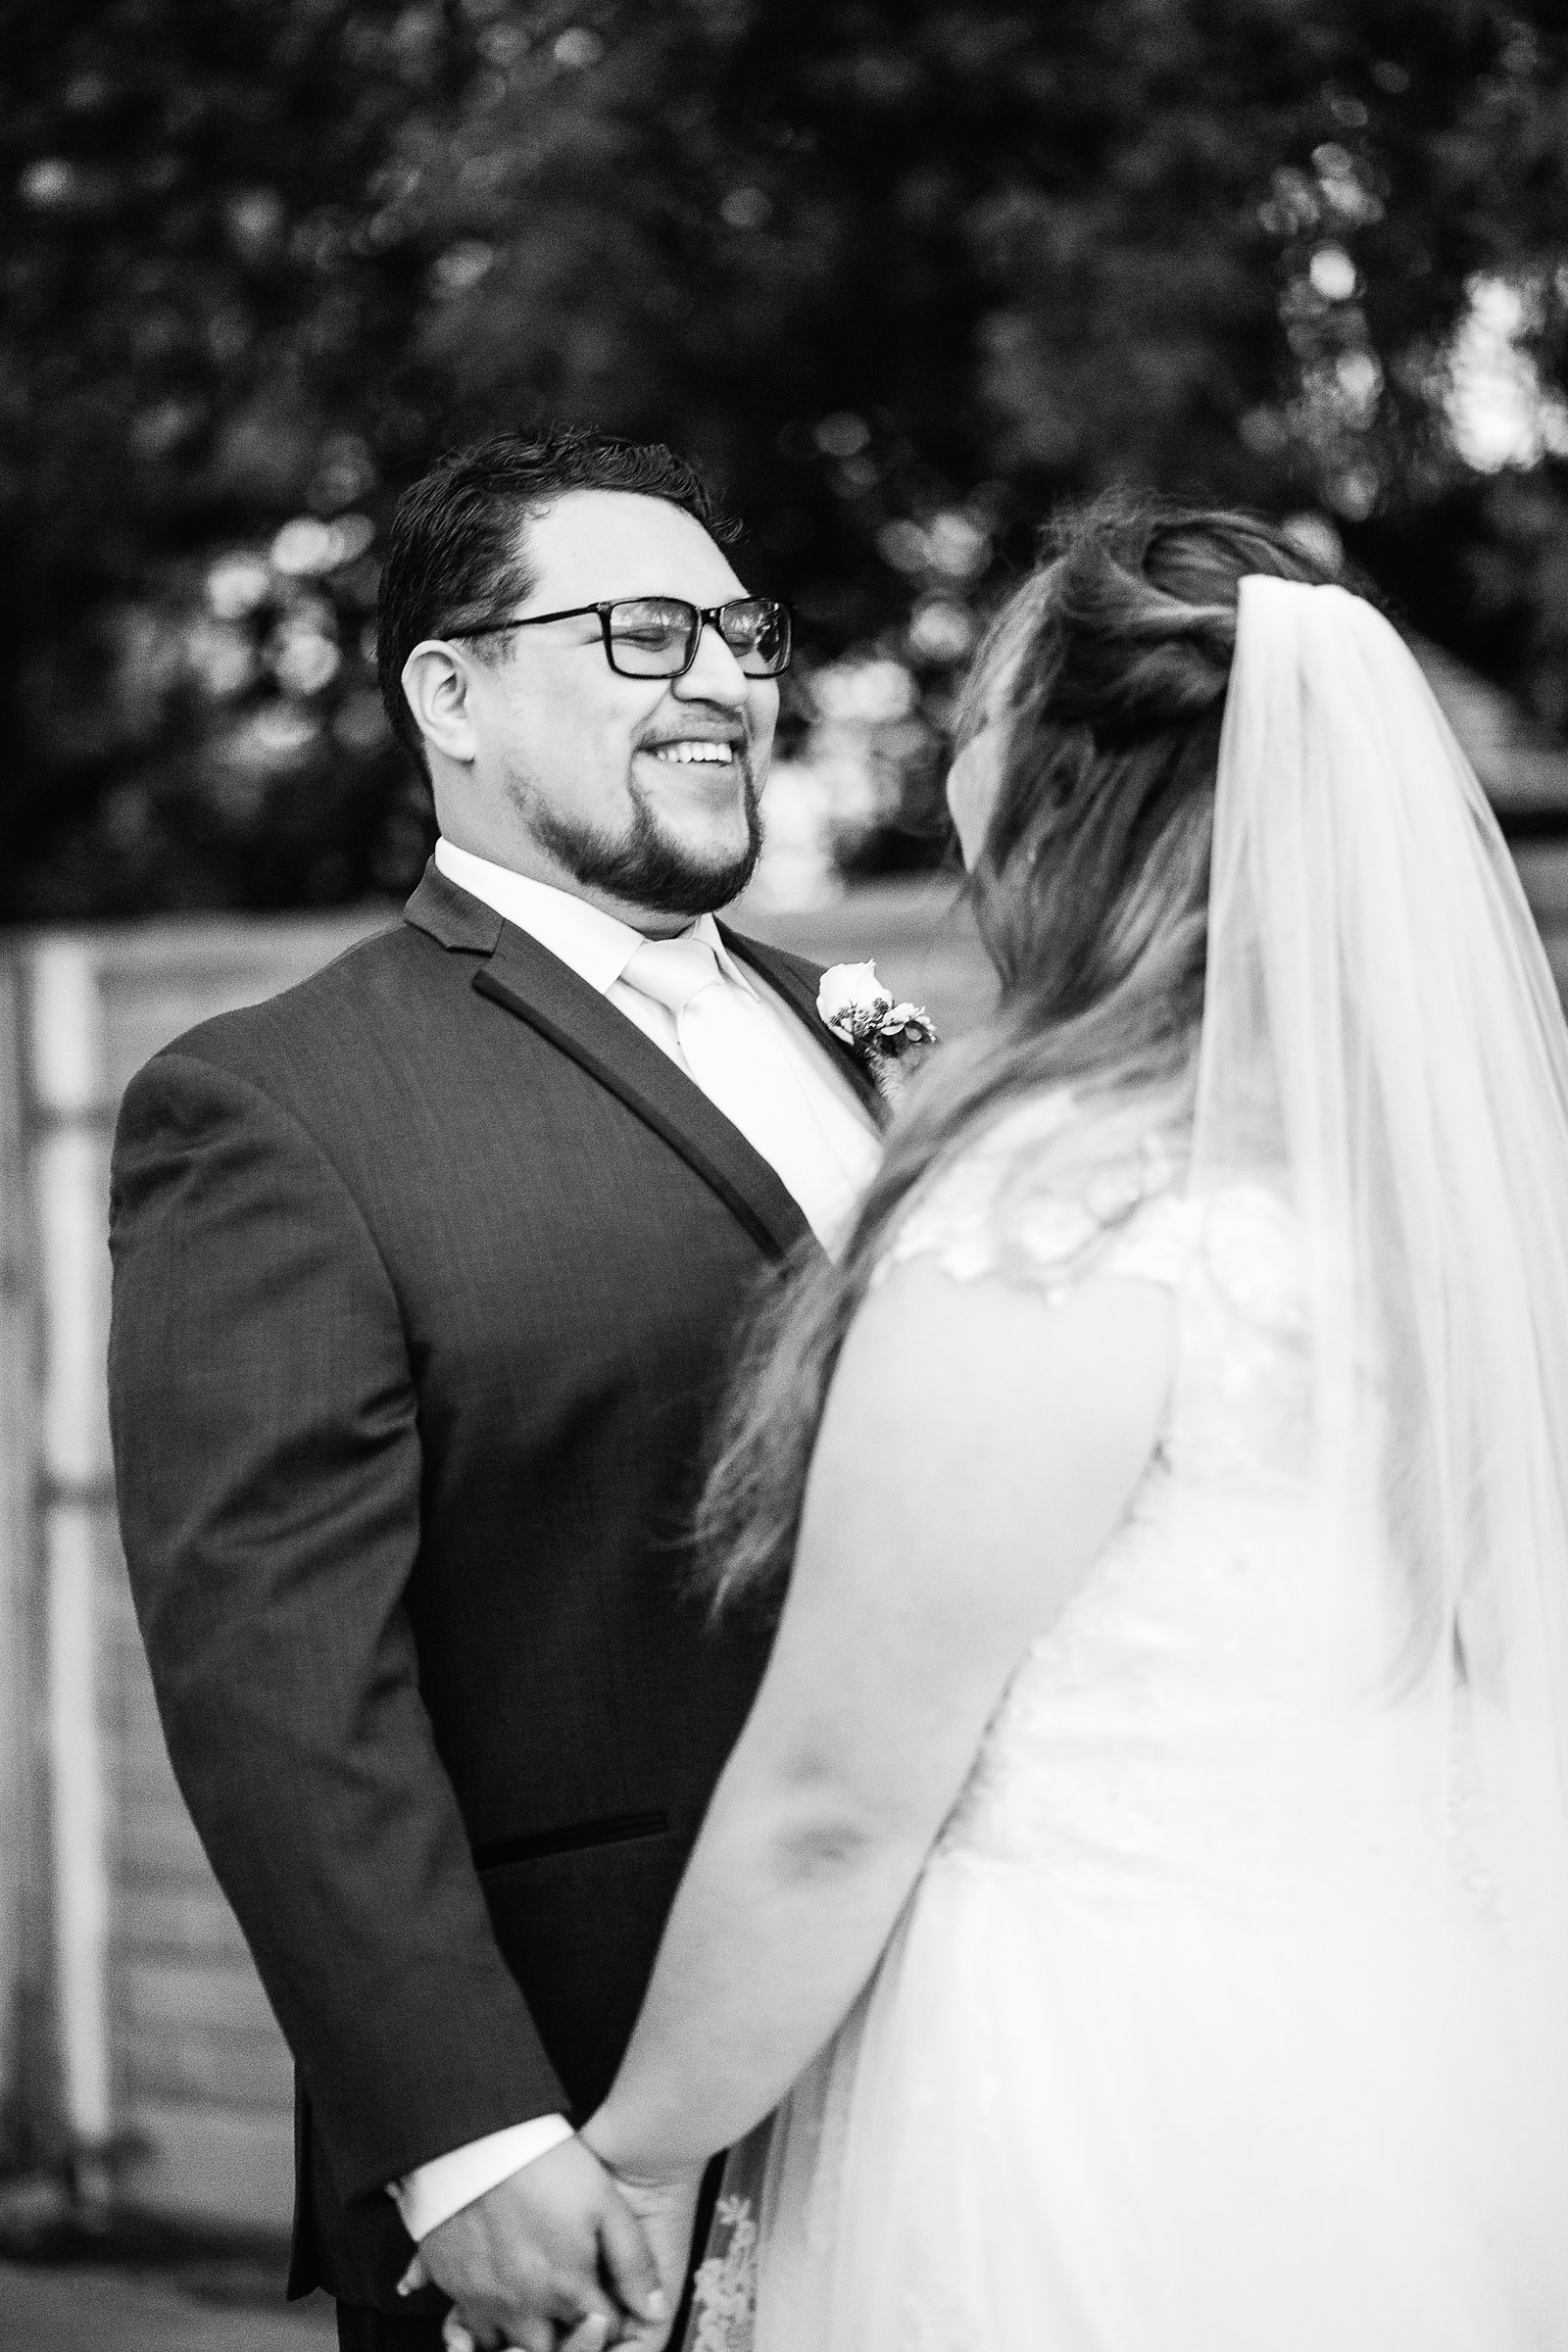 Bride and Groom laughing together during their Backyard wedding by Casa Grande wedding photographer PMA Photography.